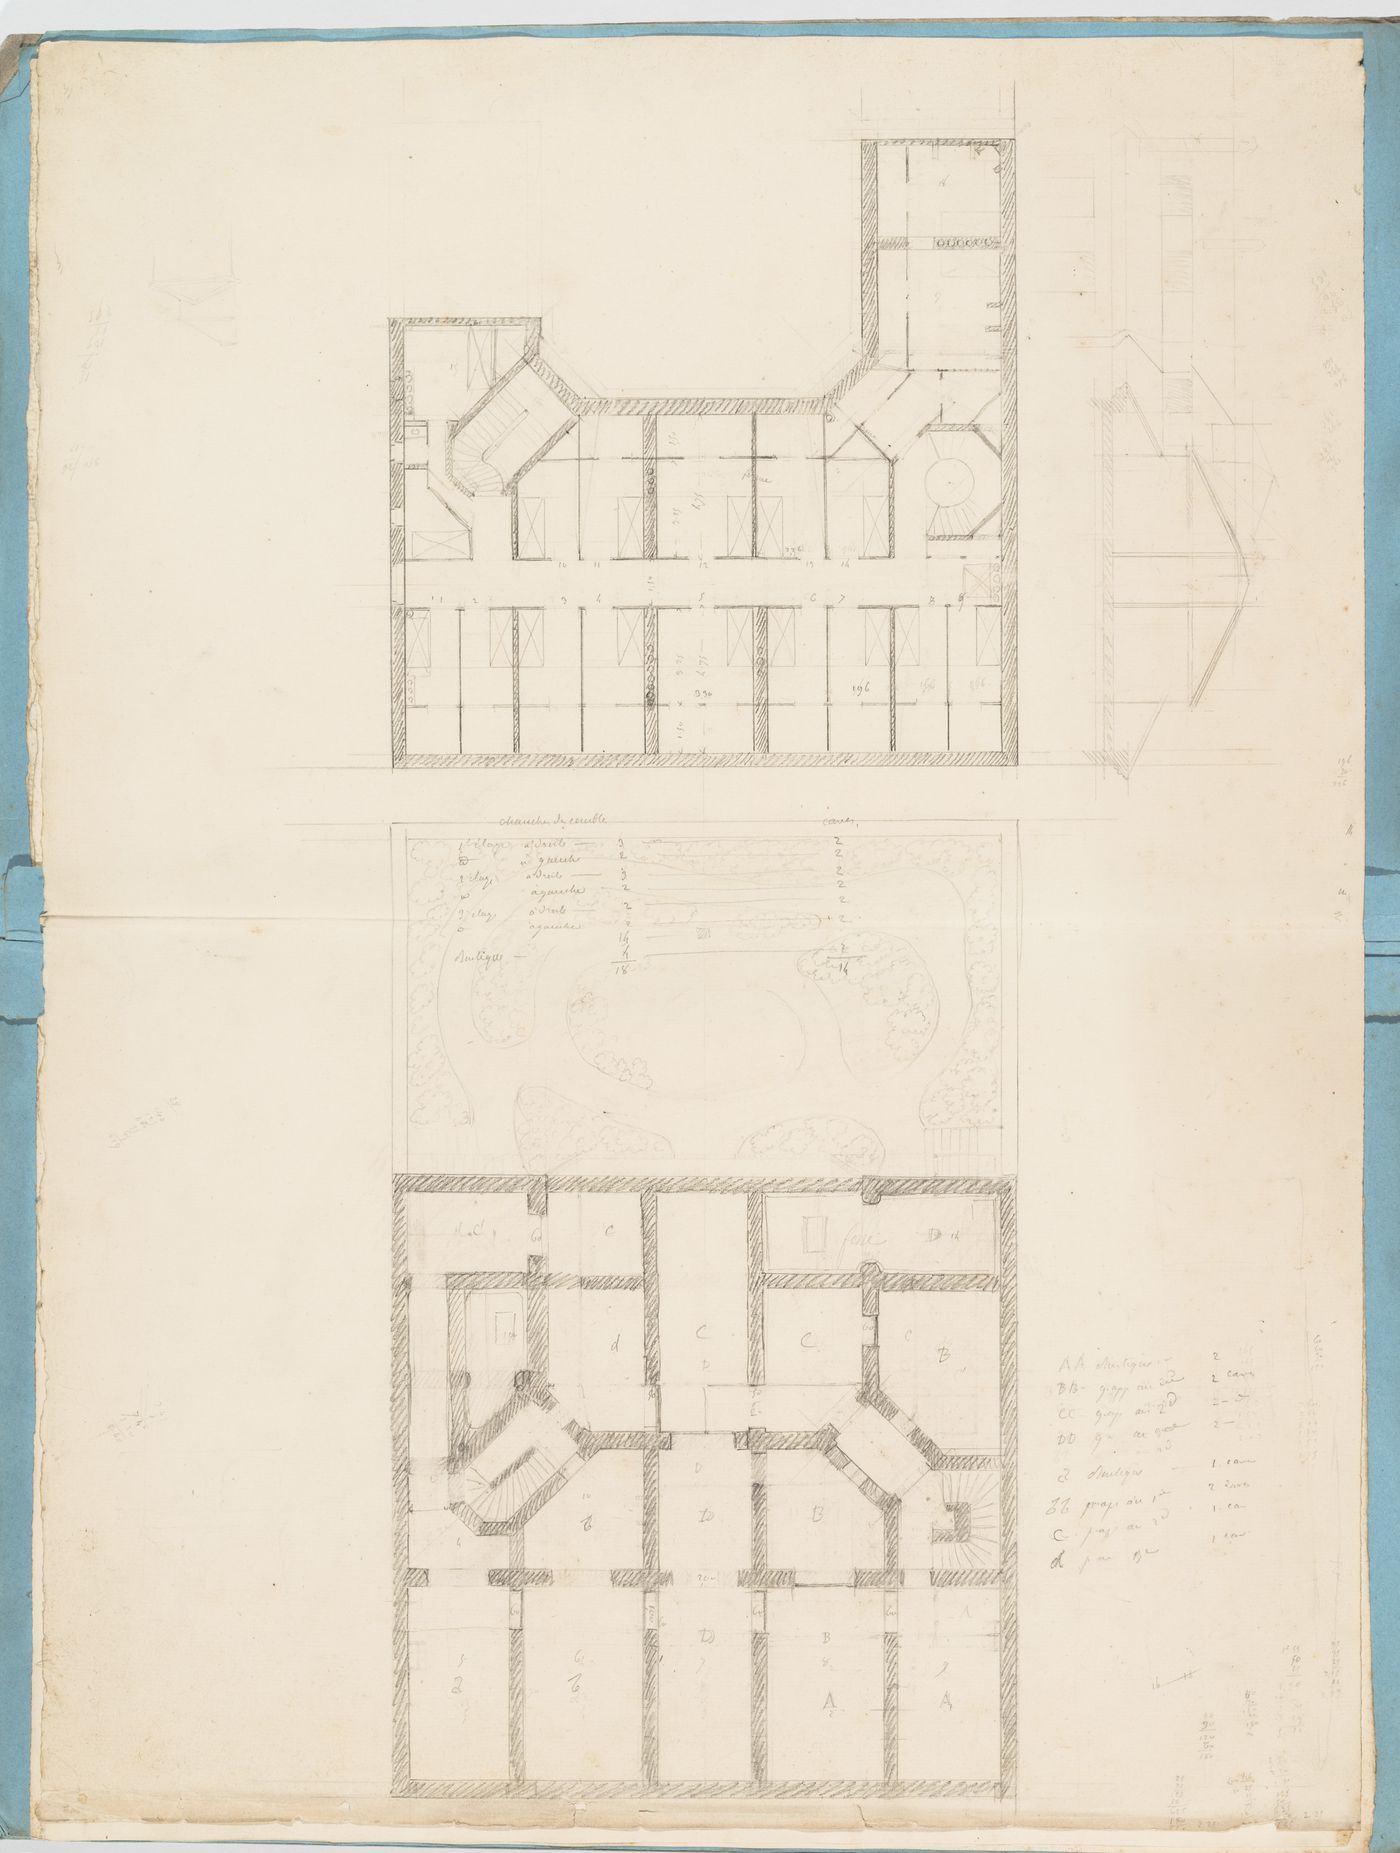 Project for a hôtel for M. Busche: Plans, probably for the "caves" and second floor for a four-storey hôtel with a garden